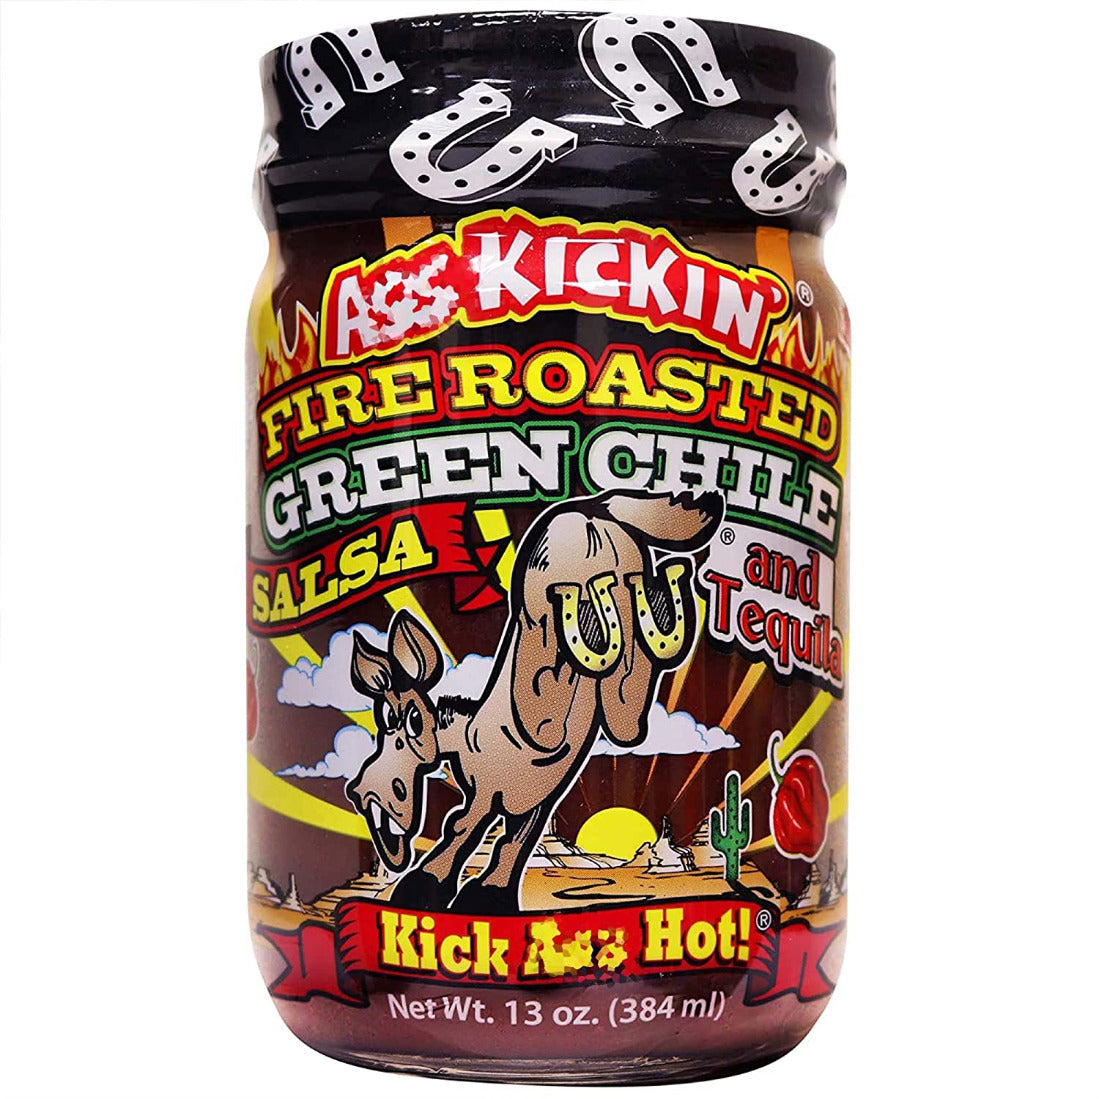 Ass Kickin Fire Roasted Green Chile and Tequila Salsa (13oz) 368 gm